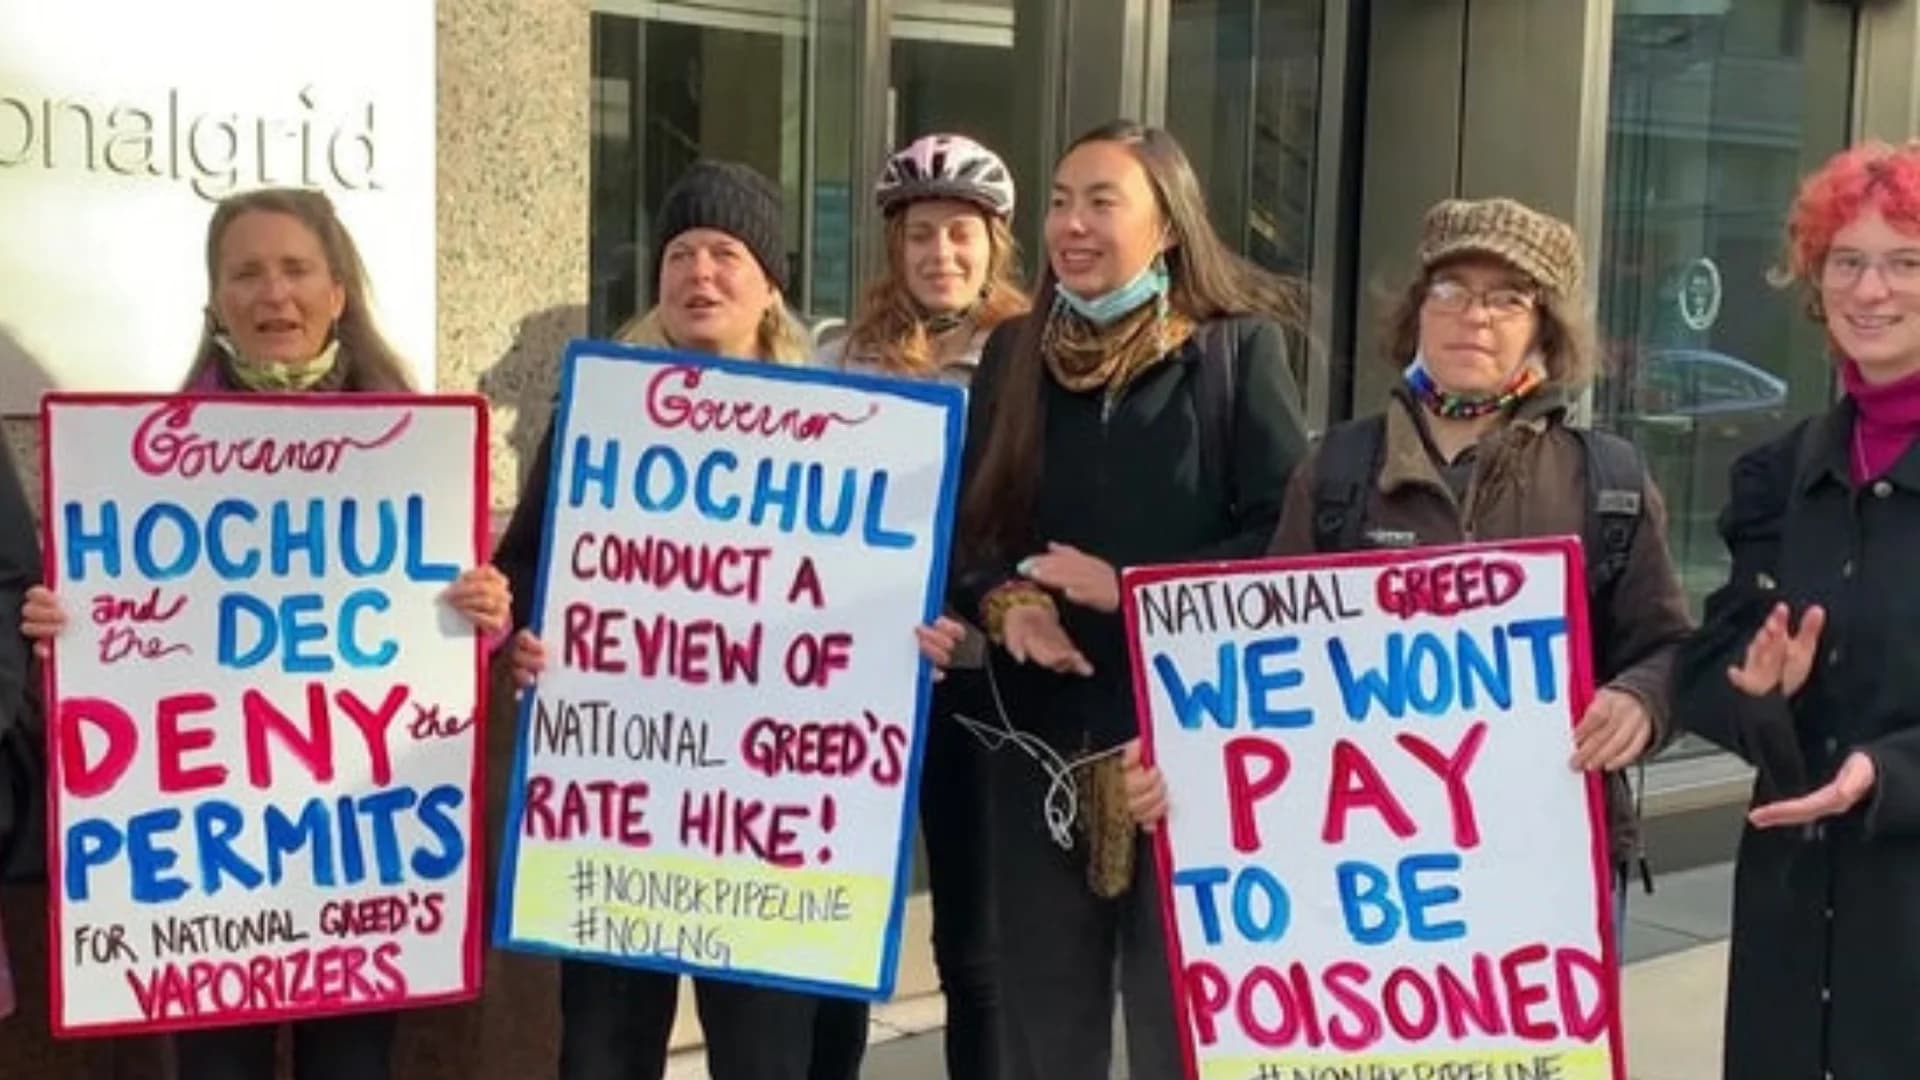 Officials, residents call on Hochul to stop National Grid rate hike